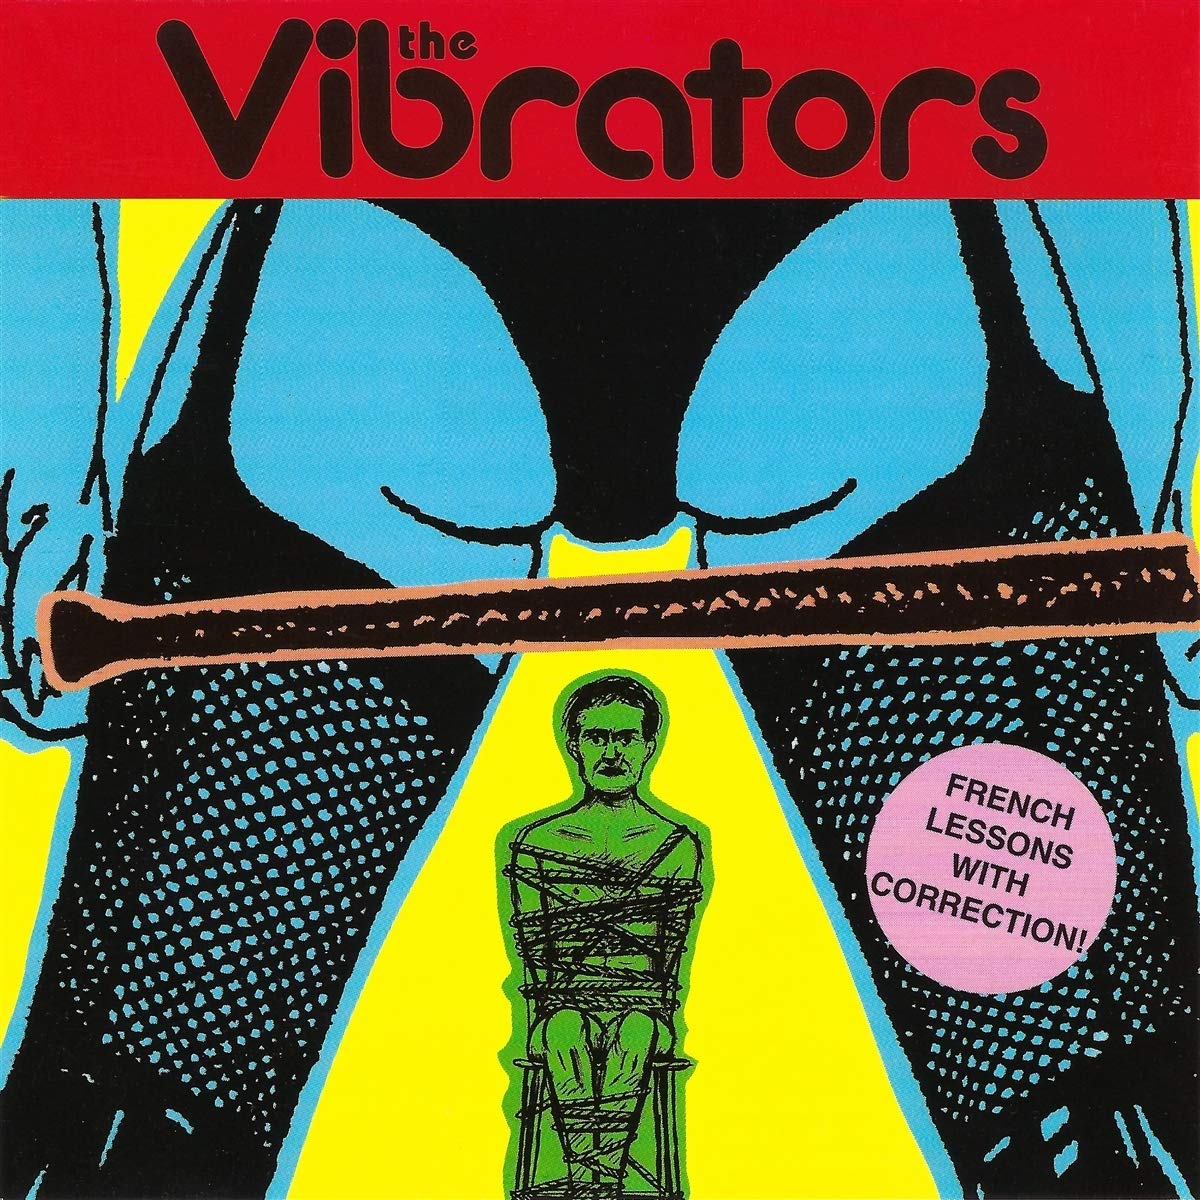 The Vibrators - French Lessons With Correction! (1997)